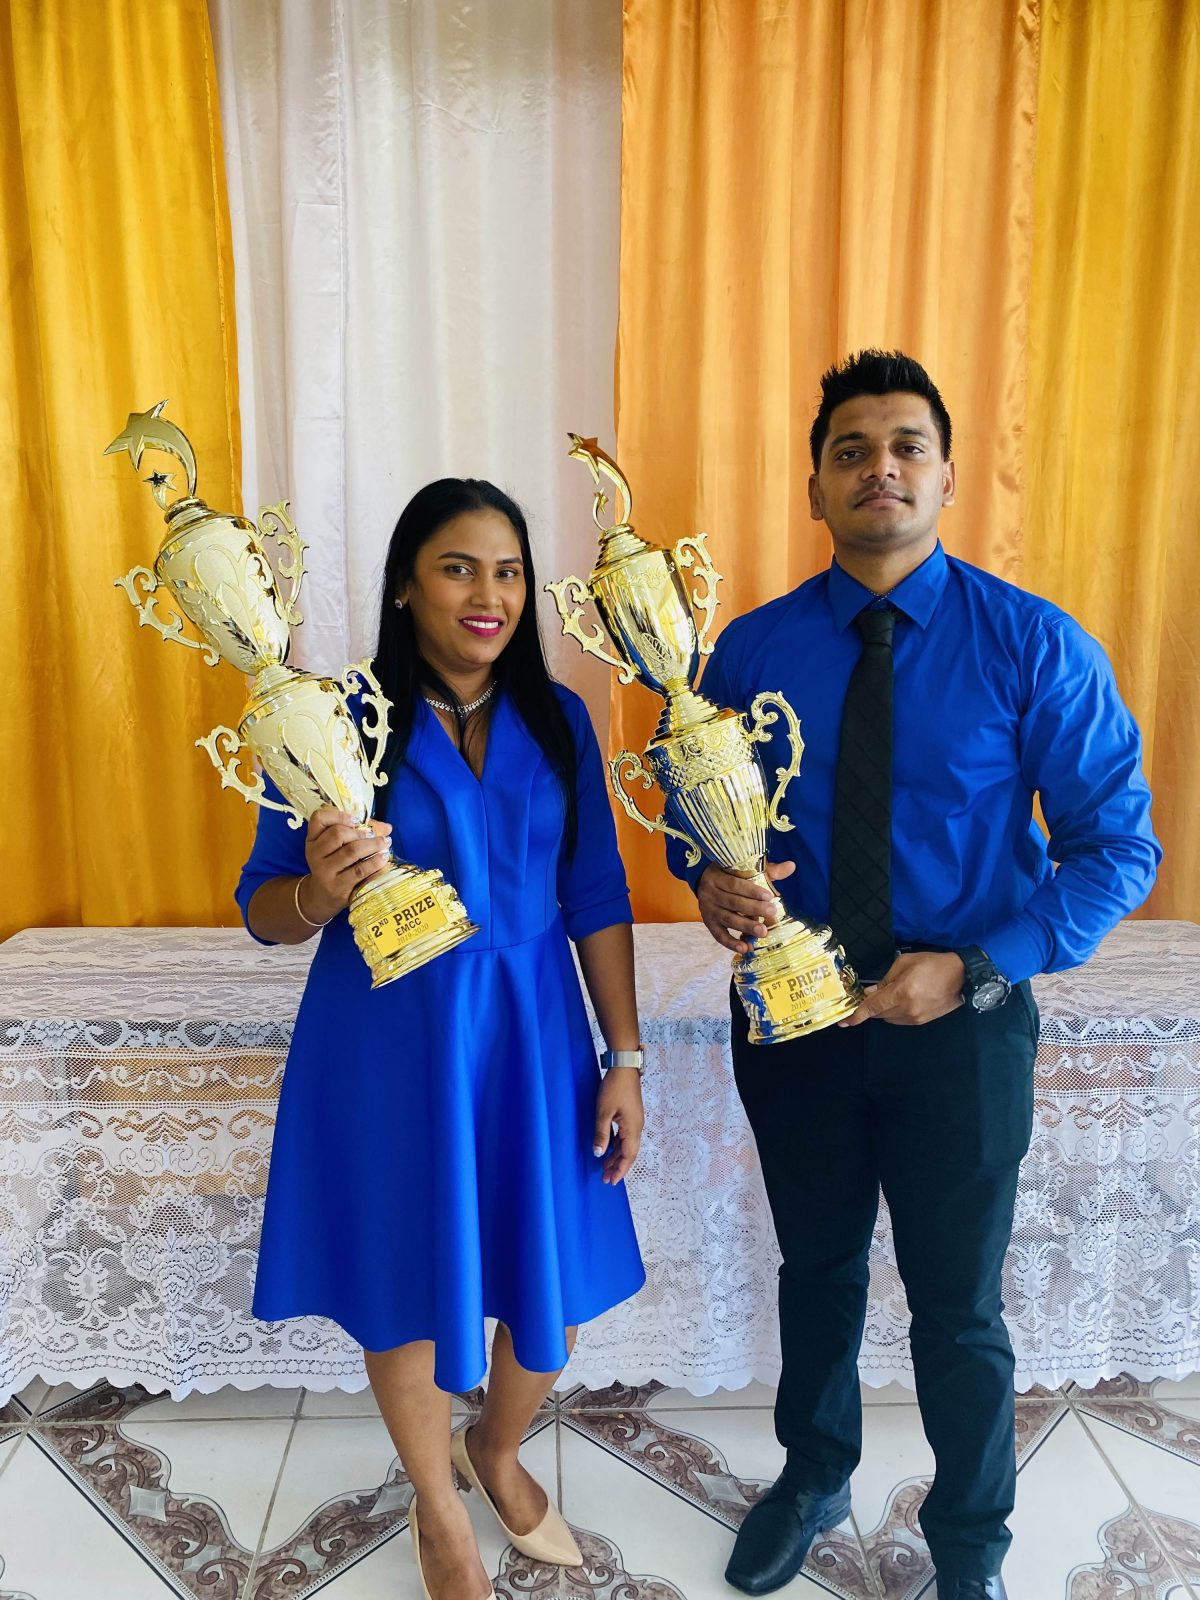 Elaine Sookdeo from Charity Secondary and Vishnu Narine from Aurora Secondary